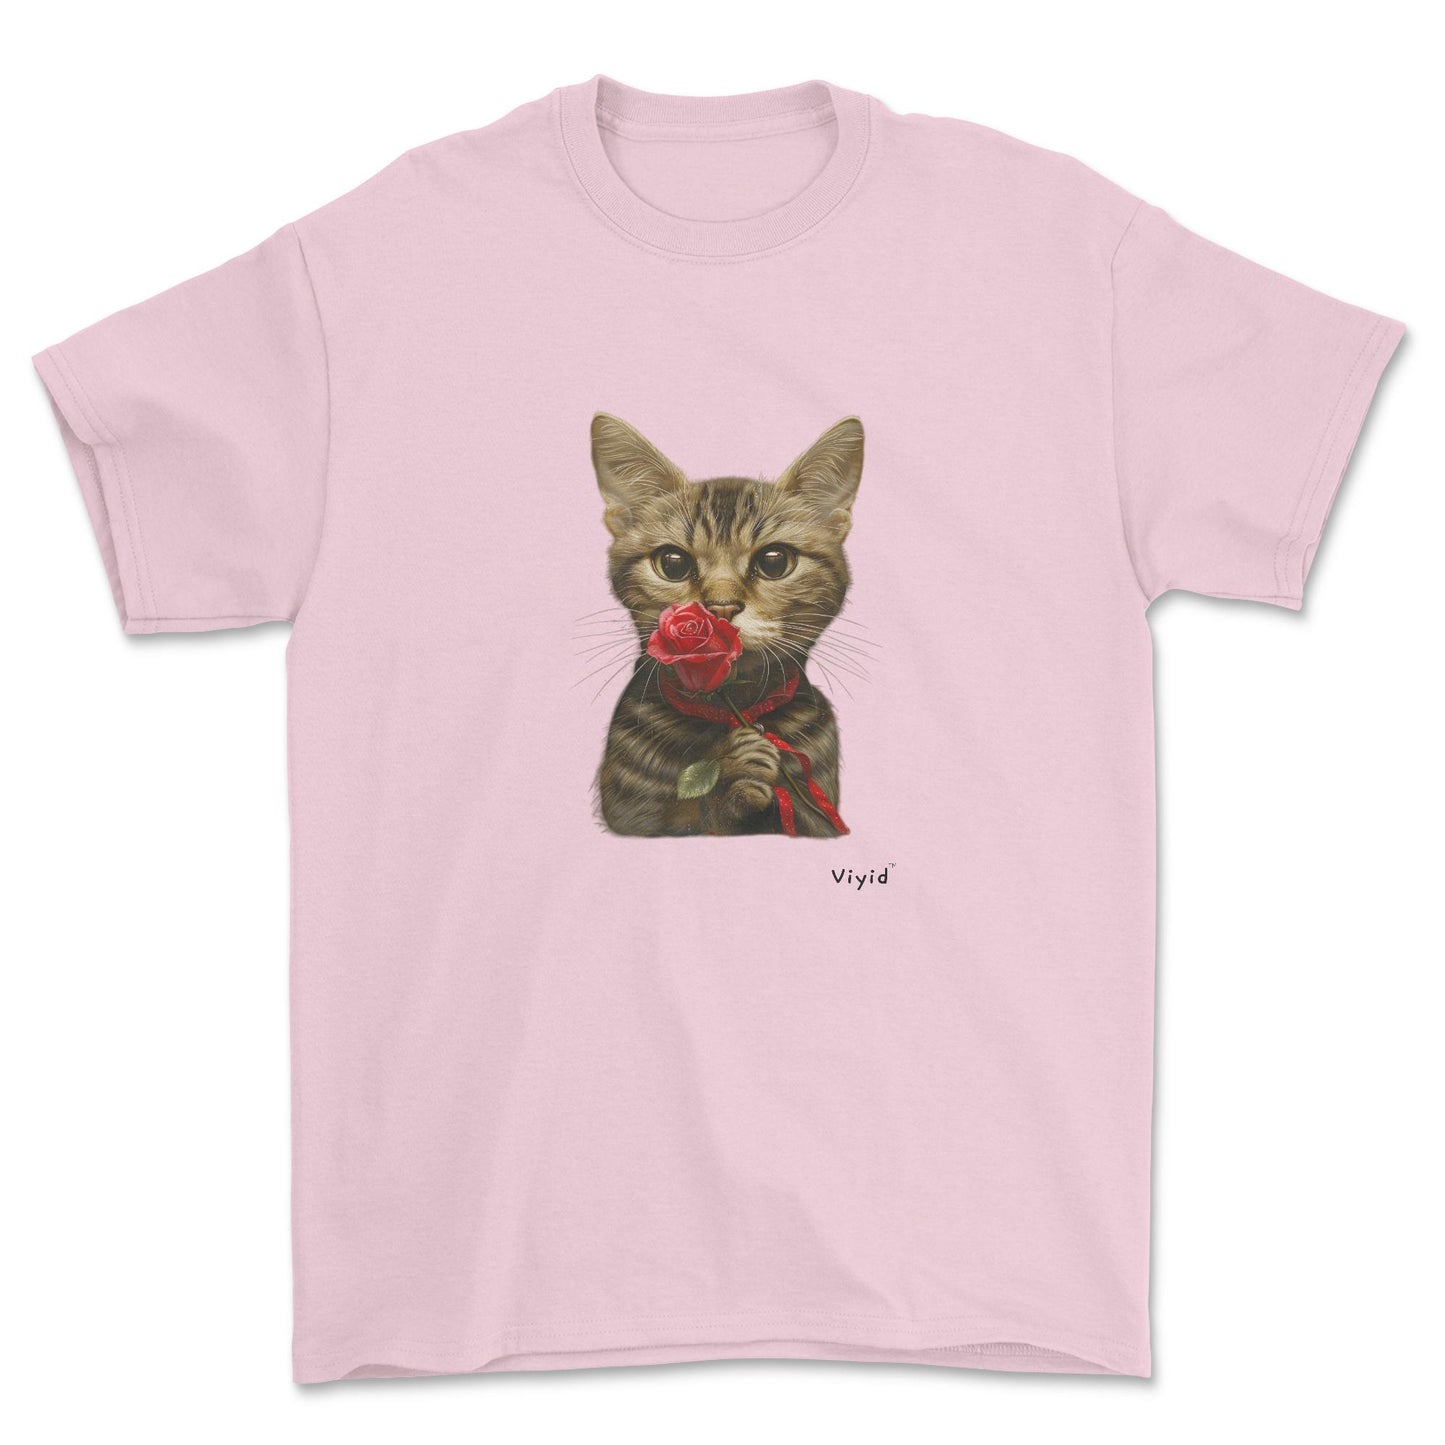 sniffing rose domestic shorthair cat adult t-shirt light pink